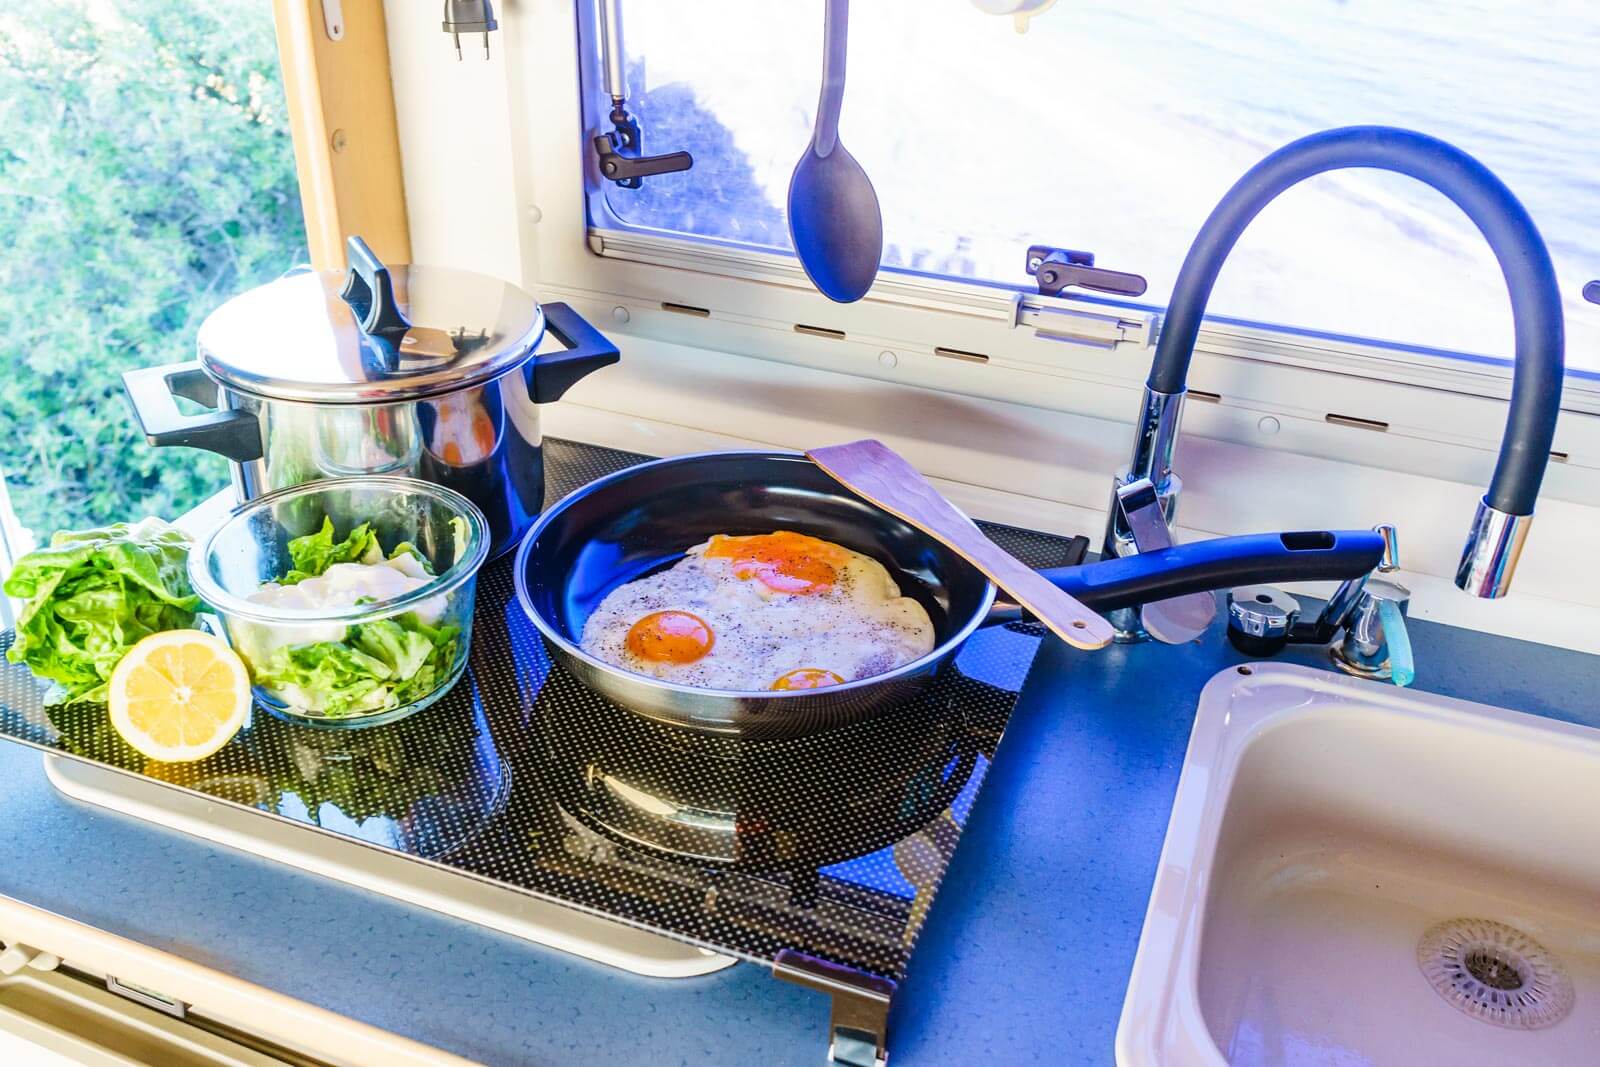 cooking a meal on an RV stove